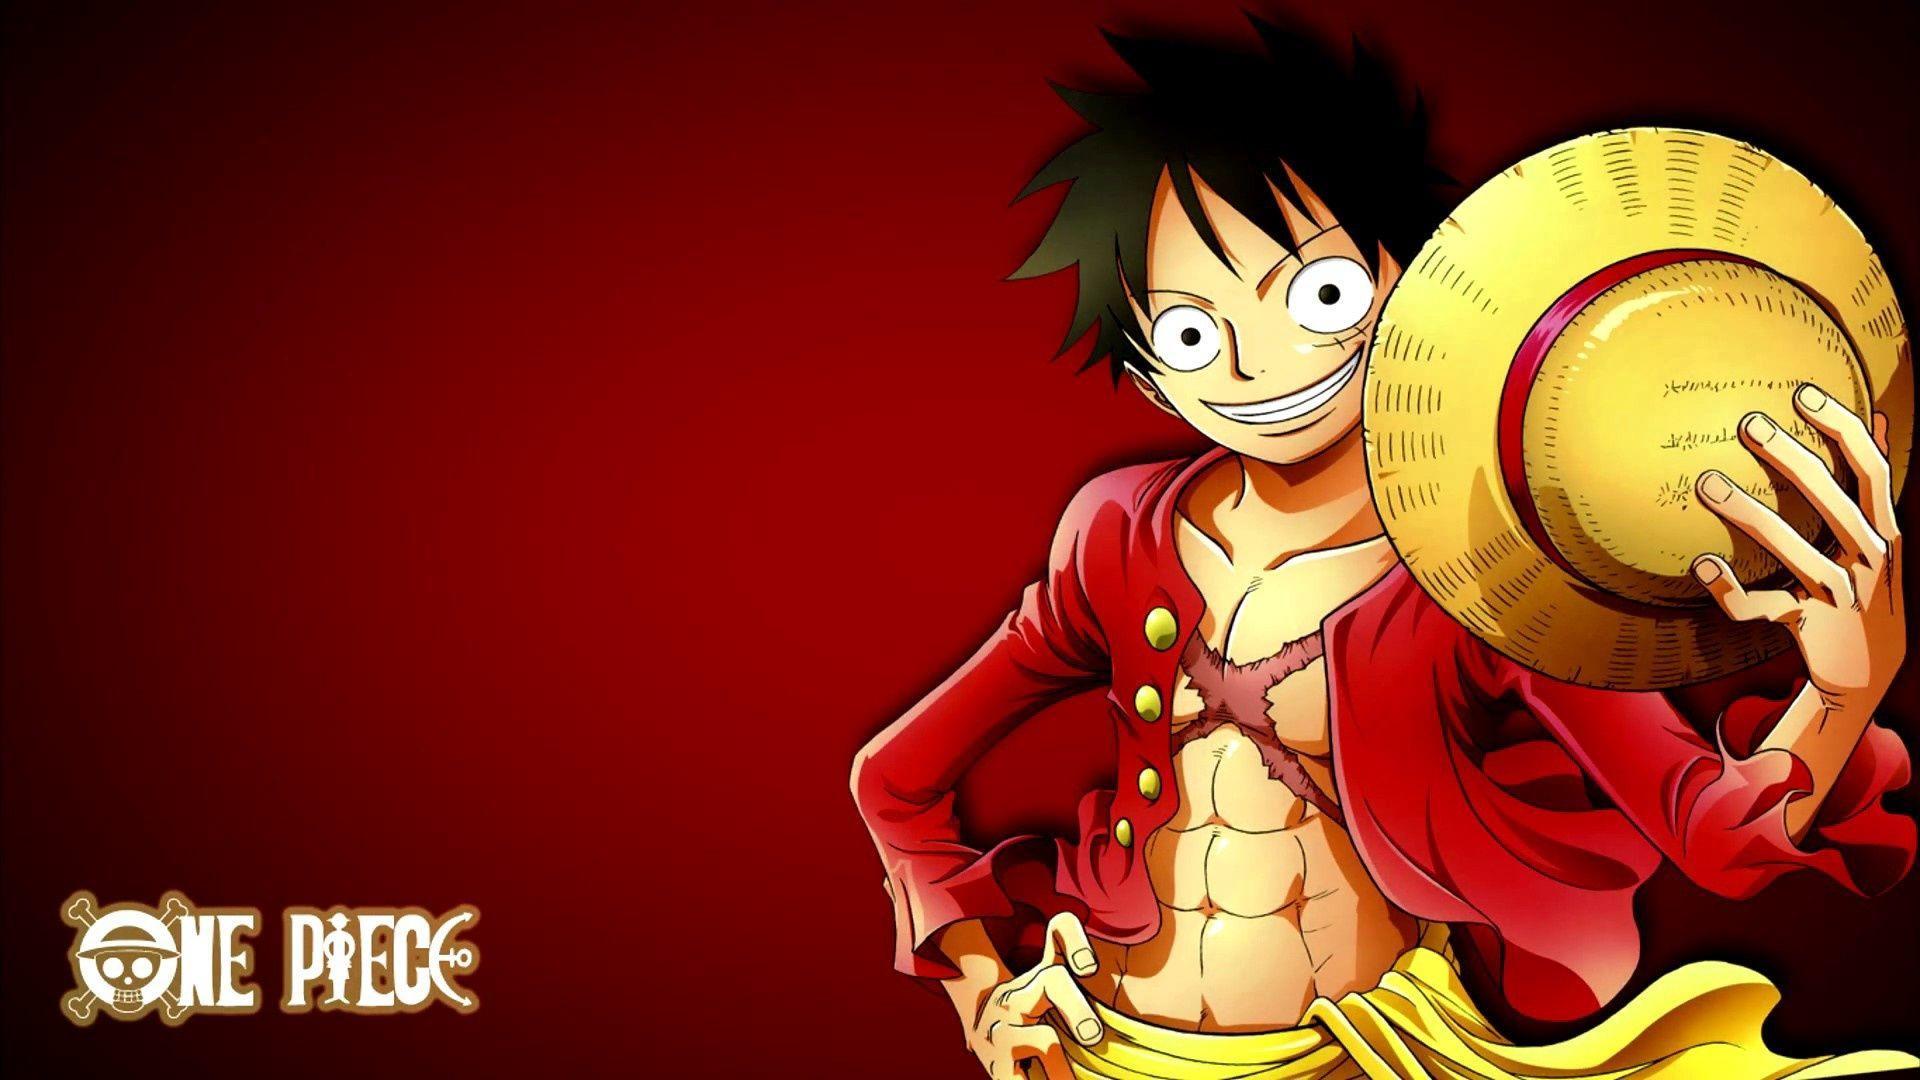 Monkey D Luffy, the rubber pirate